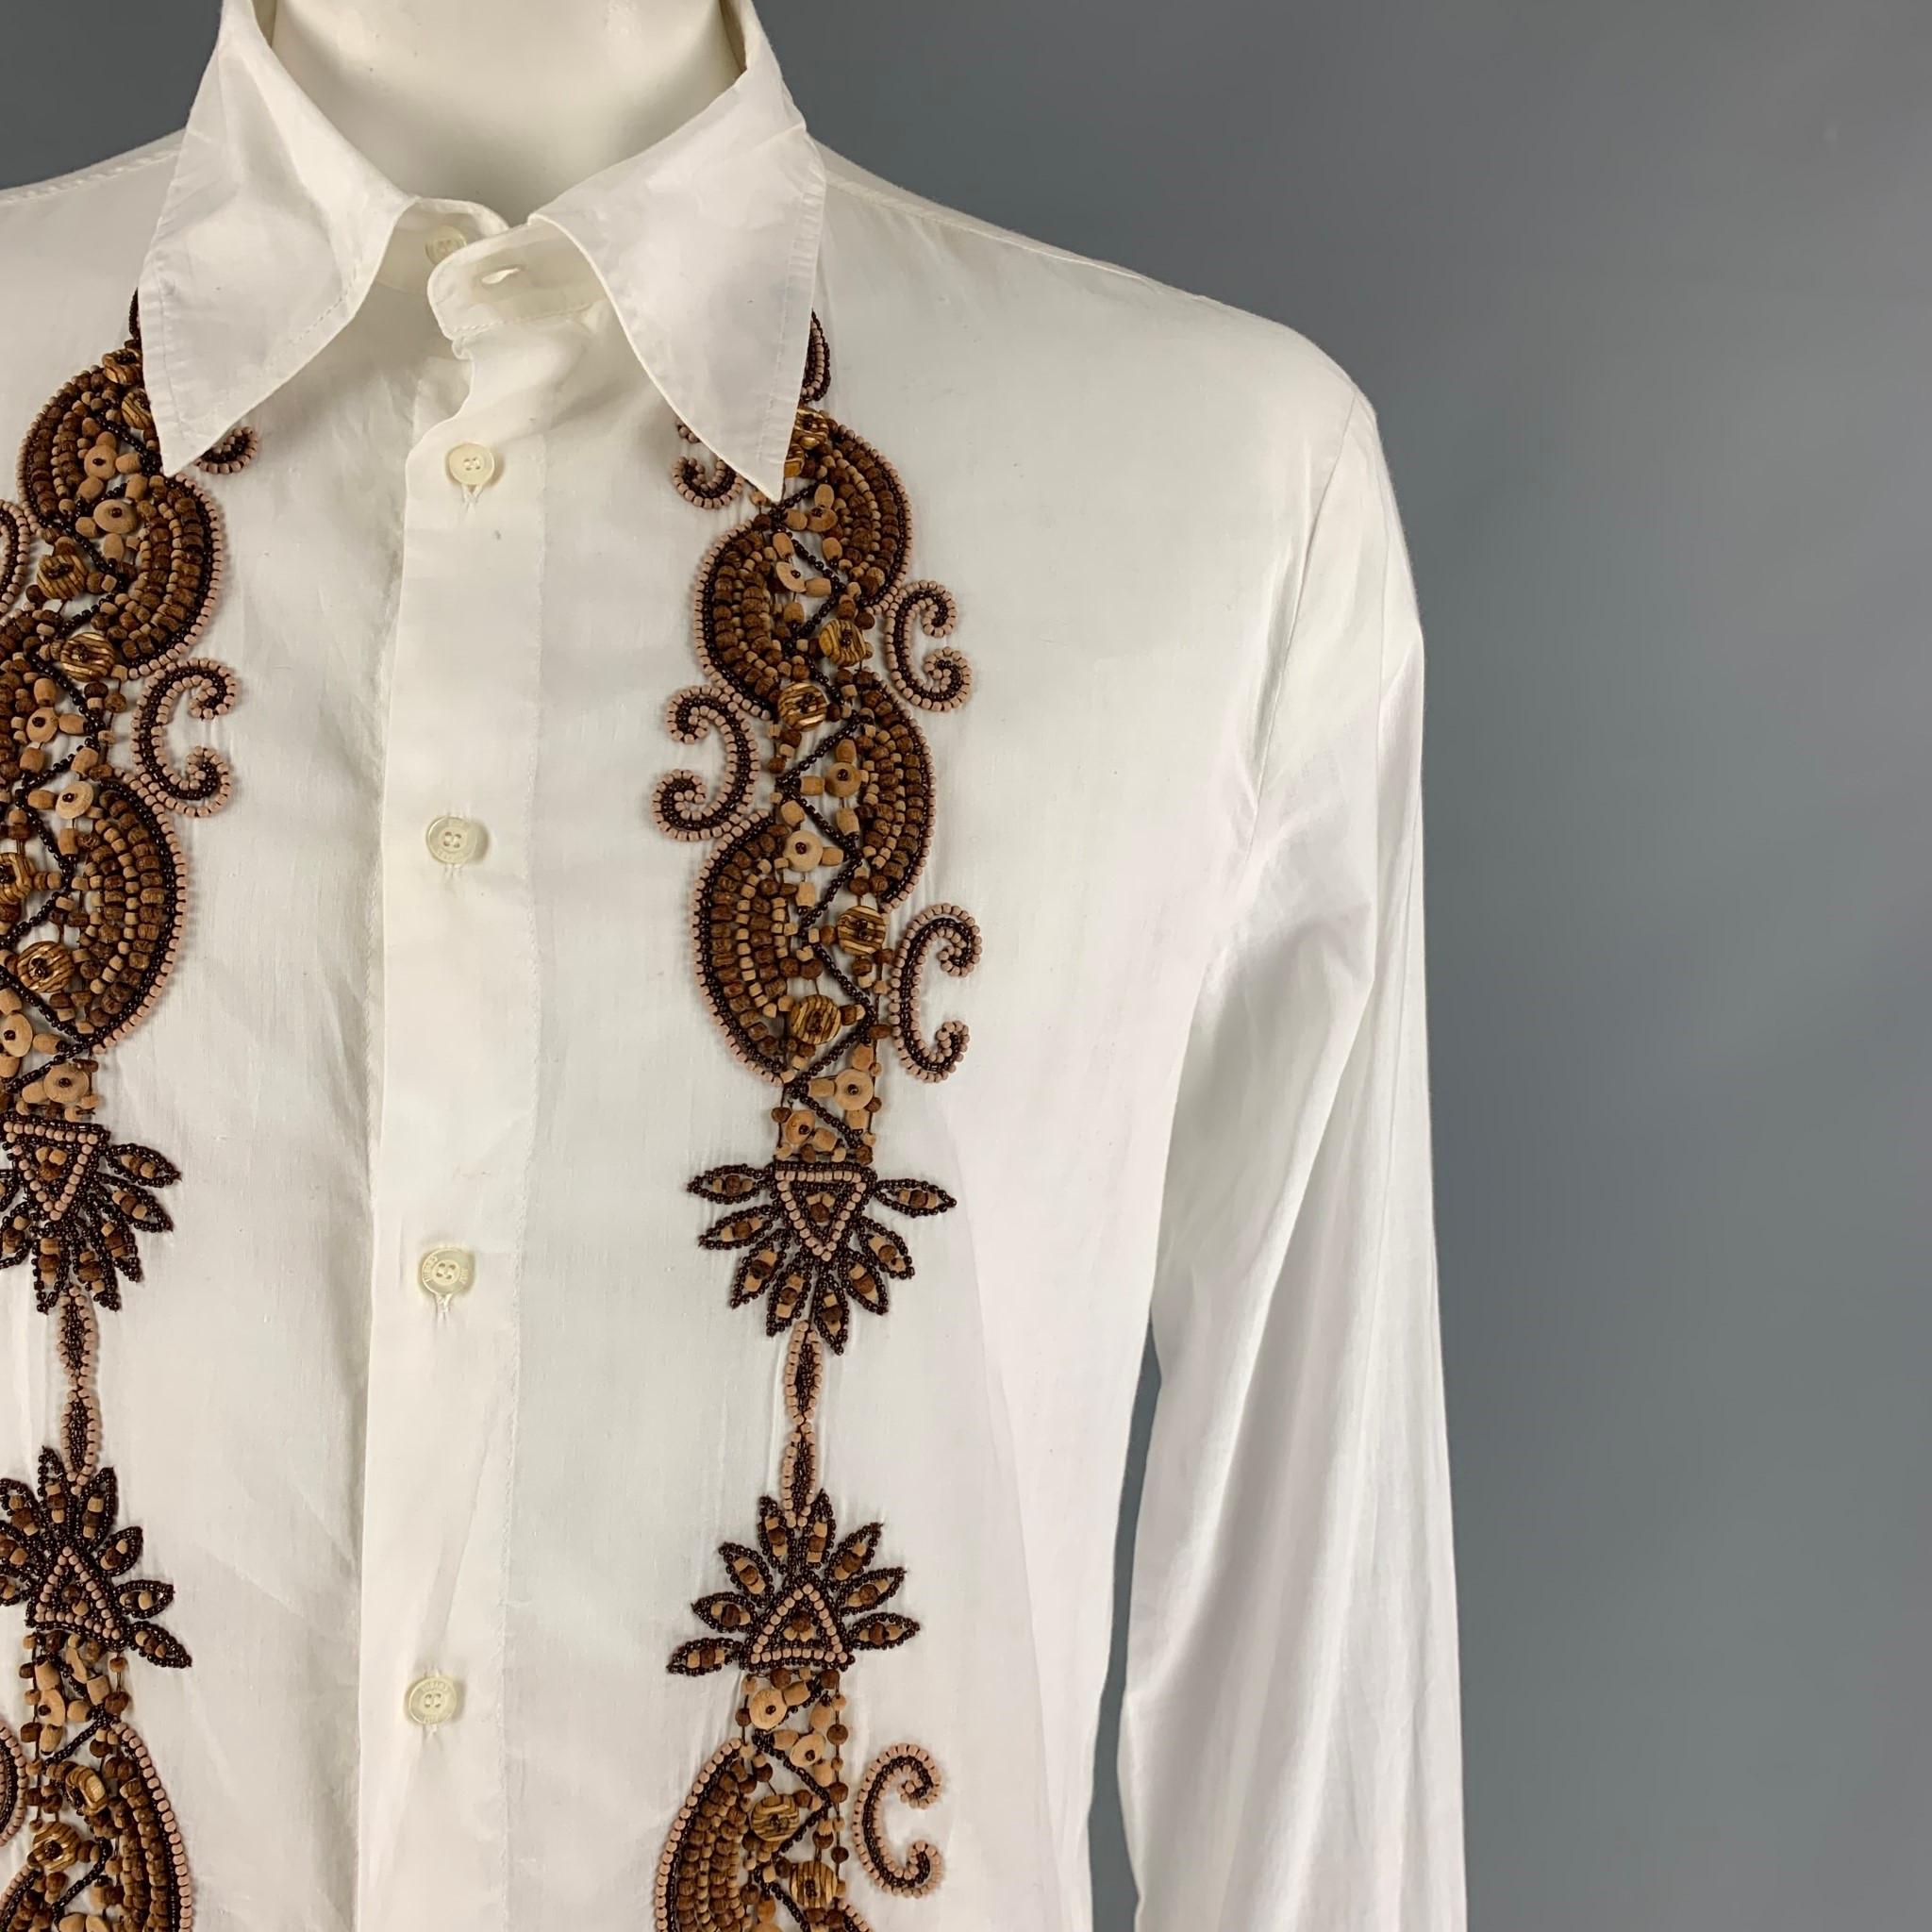 JUST CAVALLI long sleeve shit comers in a white cotton with brown beaded details featuring a spread collar and a buttoned closure. Made in Italy. 

Very Good Pre-Owned Condition.
Marked: 54

Measurements:

Shoulder: 19 in.
Chest: 44 in.
Sleeve: 30